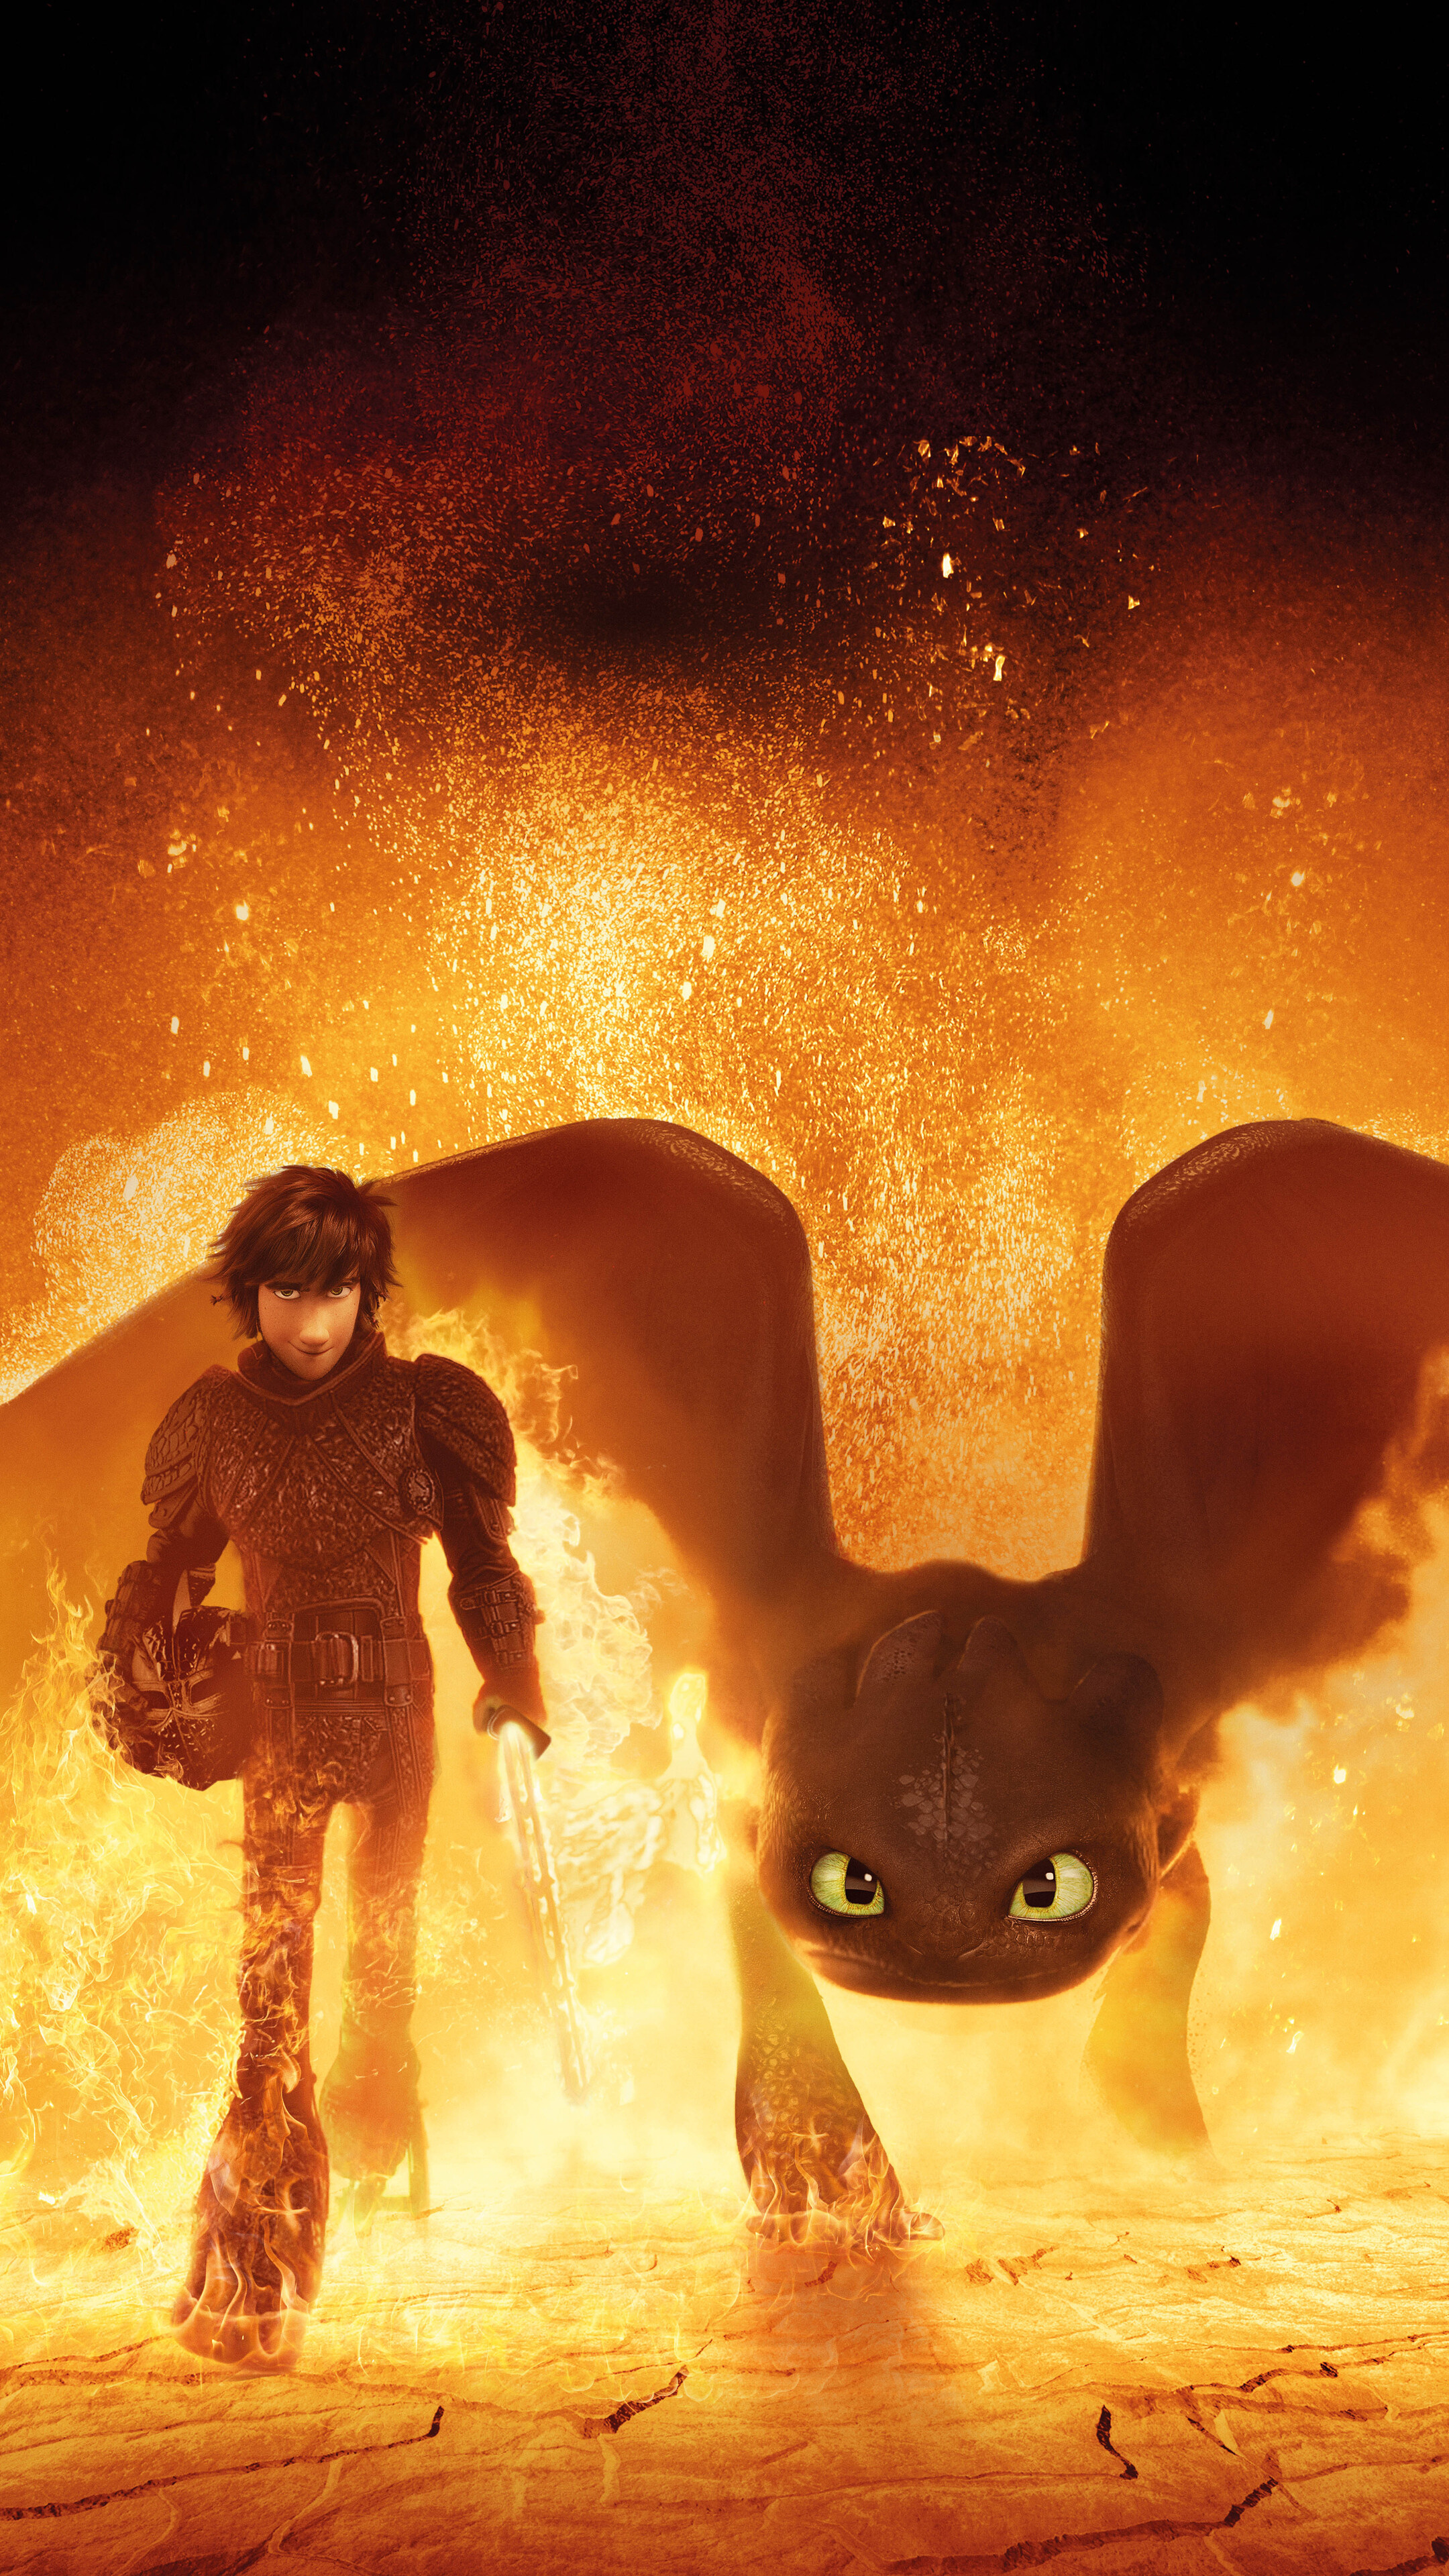 How to Train Your Dragon, Hidden world 4K 2019, Sony Xperia wallpapers, HD 4K, 2160x3840 4K Handy